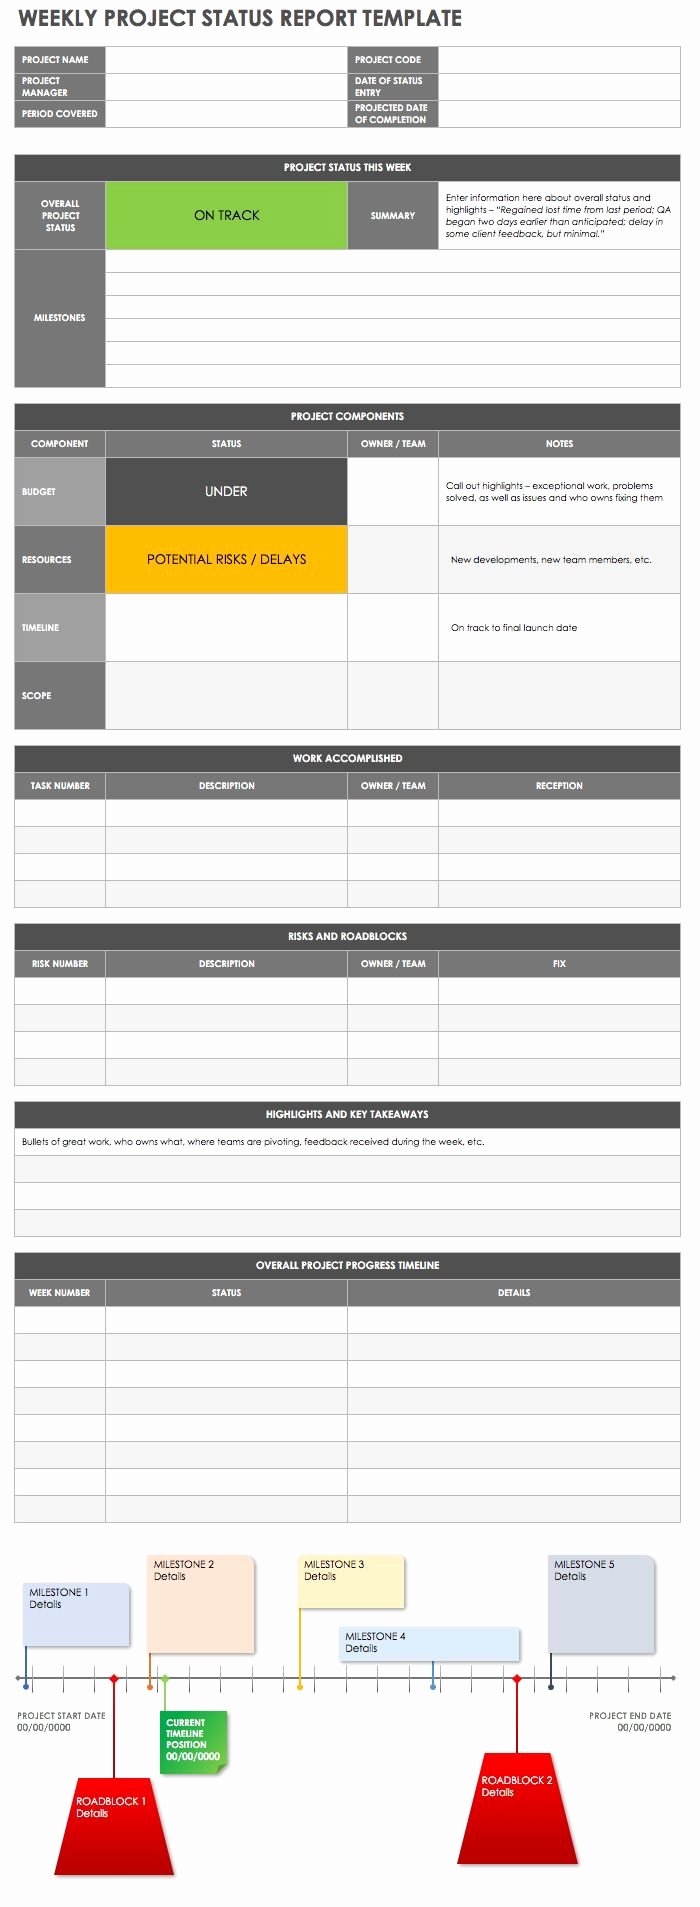 Weekly Project Status Report Template Excel Fresh How to Create An Effective Project Status Report